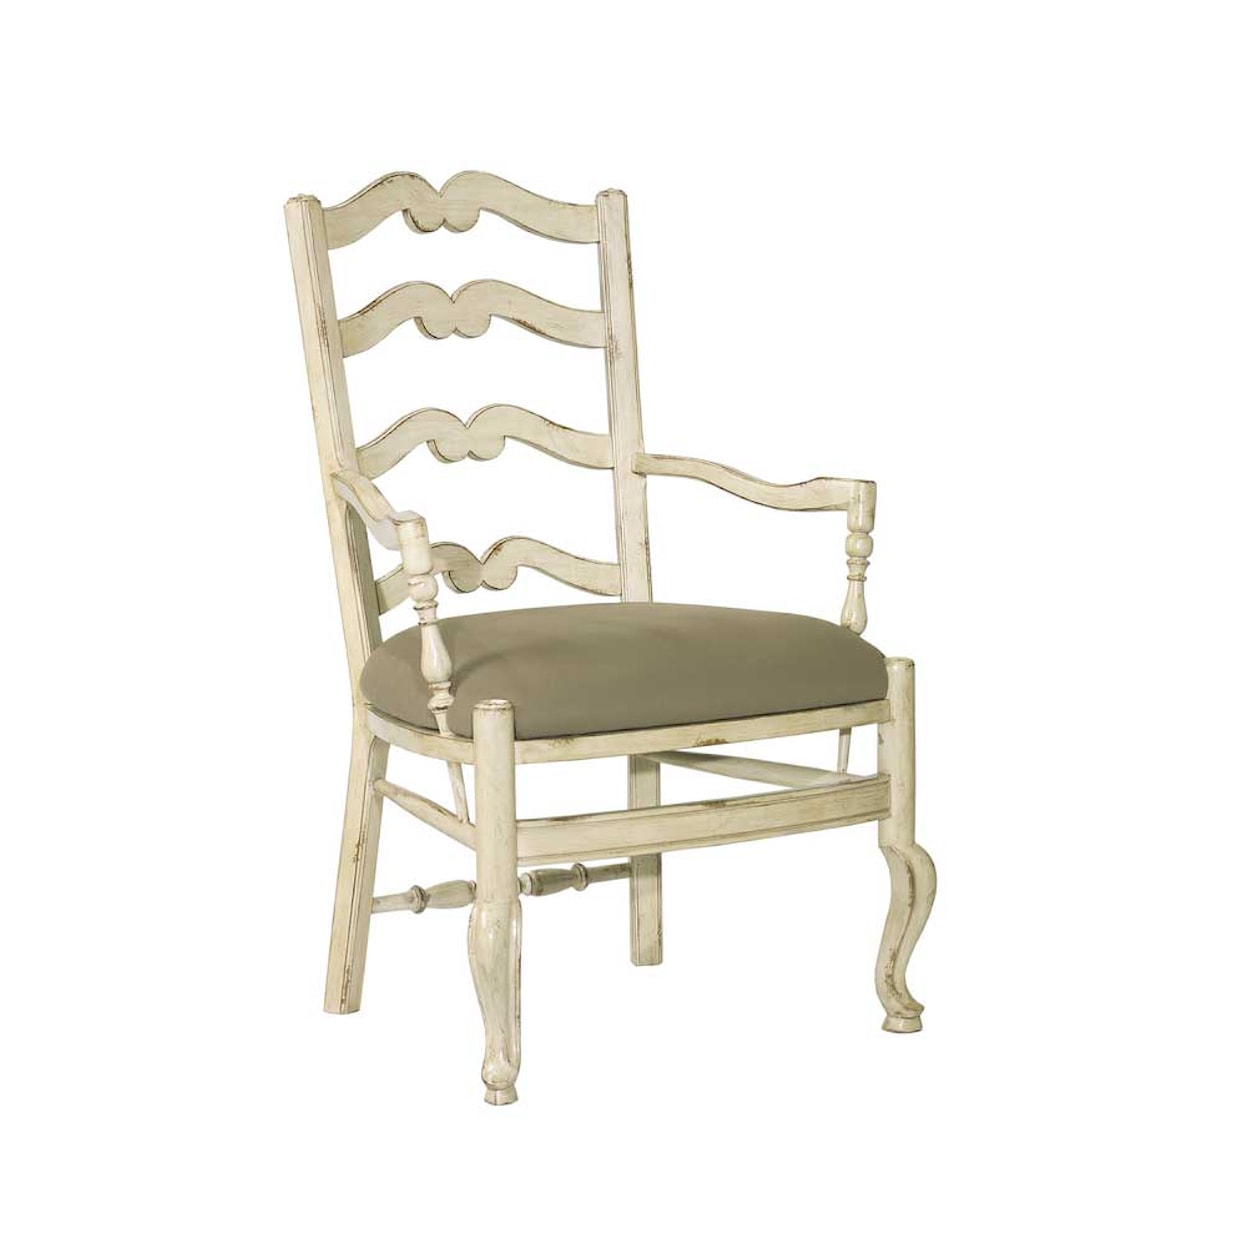 Woodbridge Home Accents Ladder Back Arm Chair